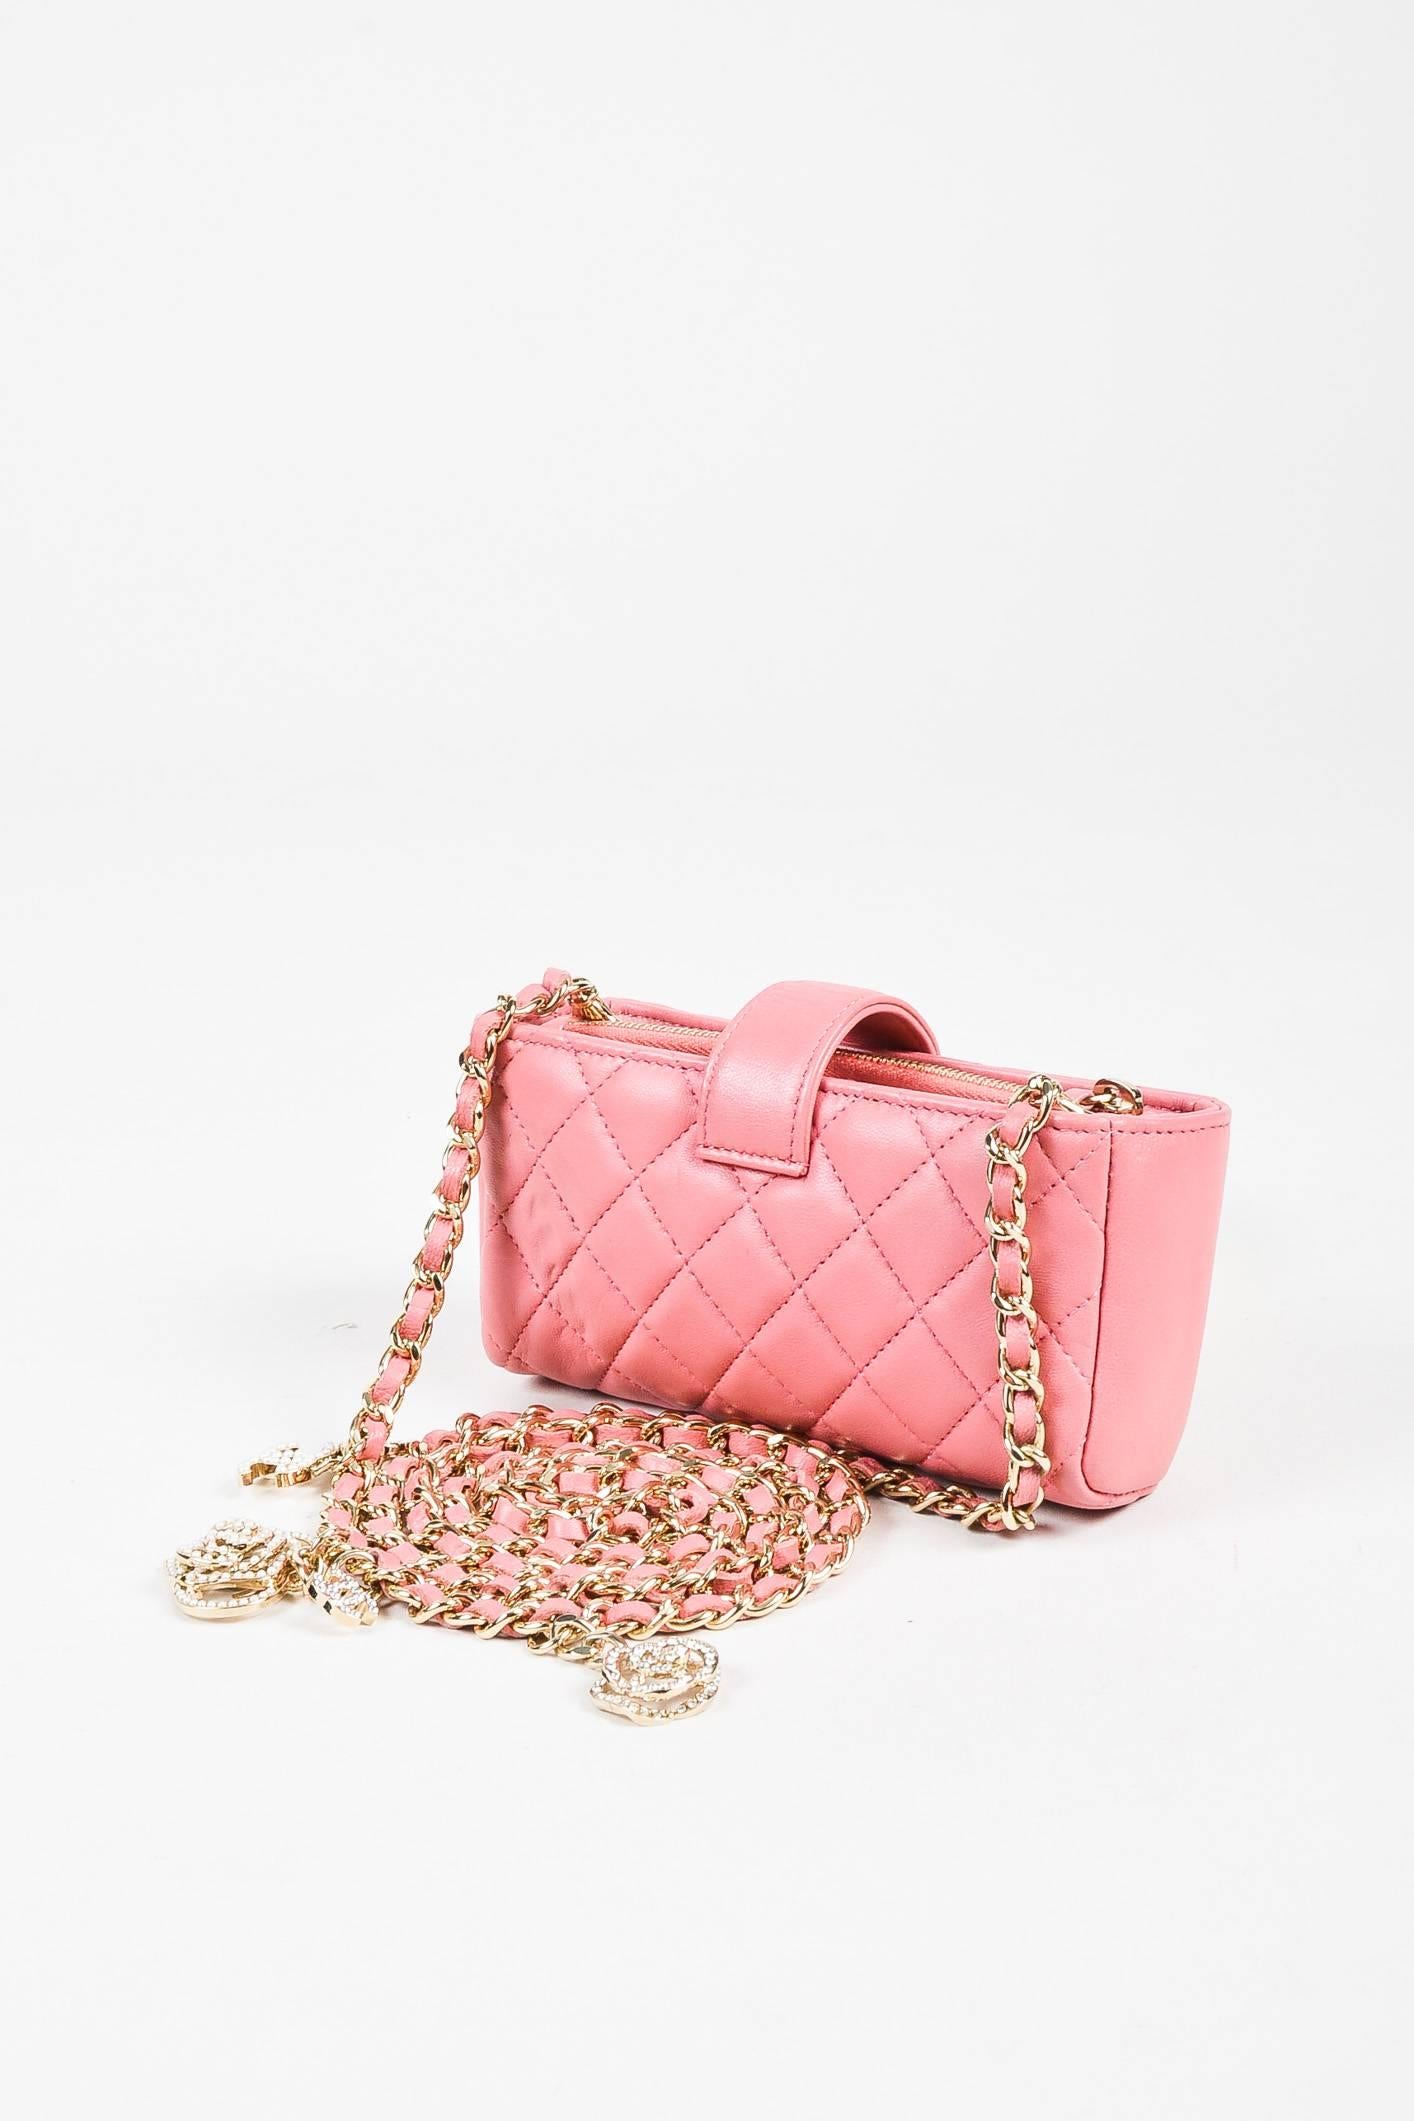 Retails $2200. Carry your most important essentials in this pink mini bag. From Chanel's Spring 2014 Valentine Collection. Constructed of soft and supple quilted lambskin leather. Tab fastening featuring a 'CC' emblem. Chain crossbody strap woven